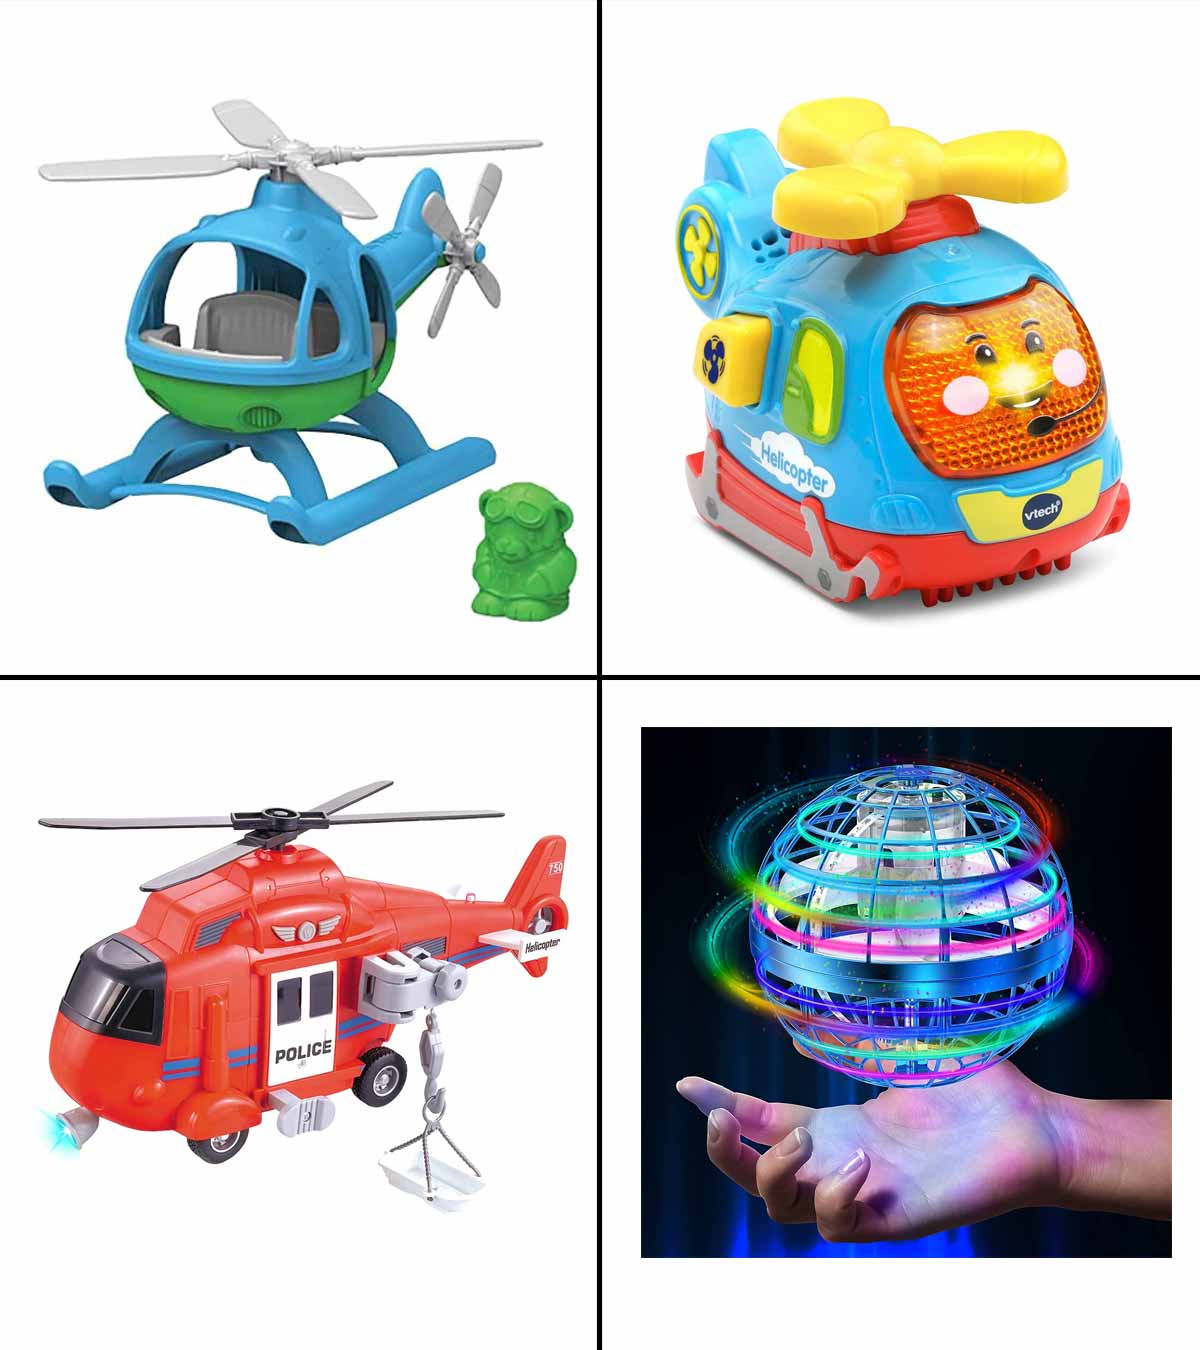 11 Best Helicopter Toys To Buy In 2023